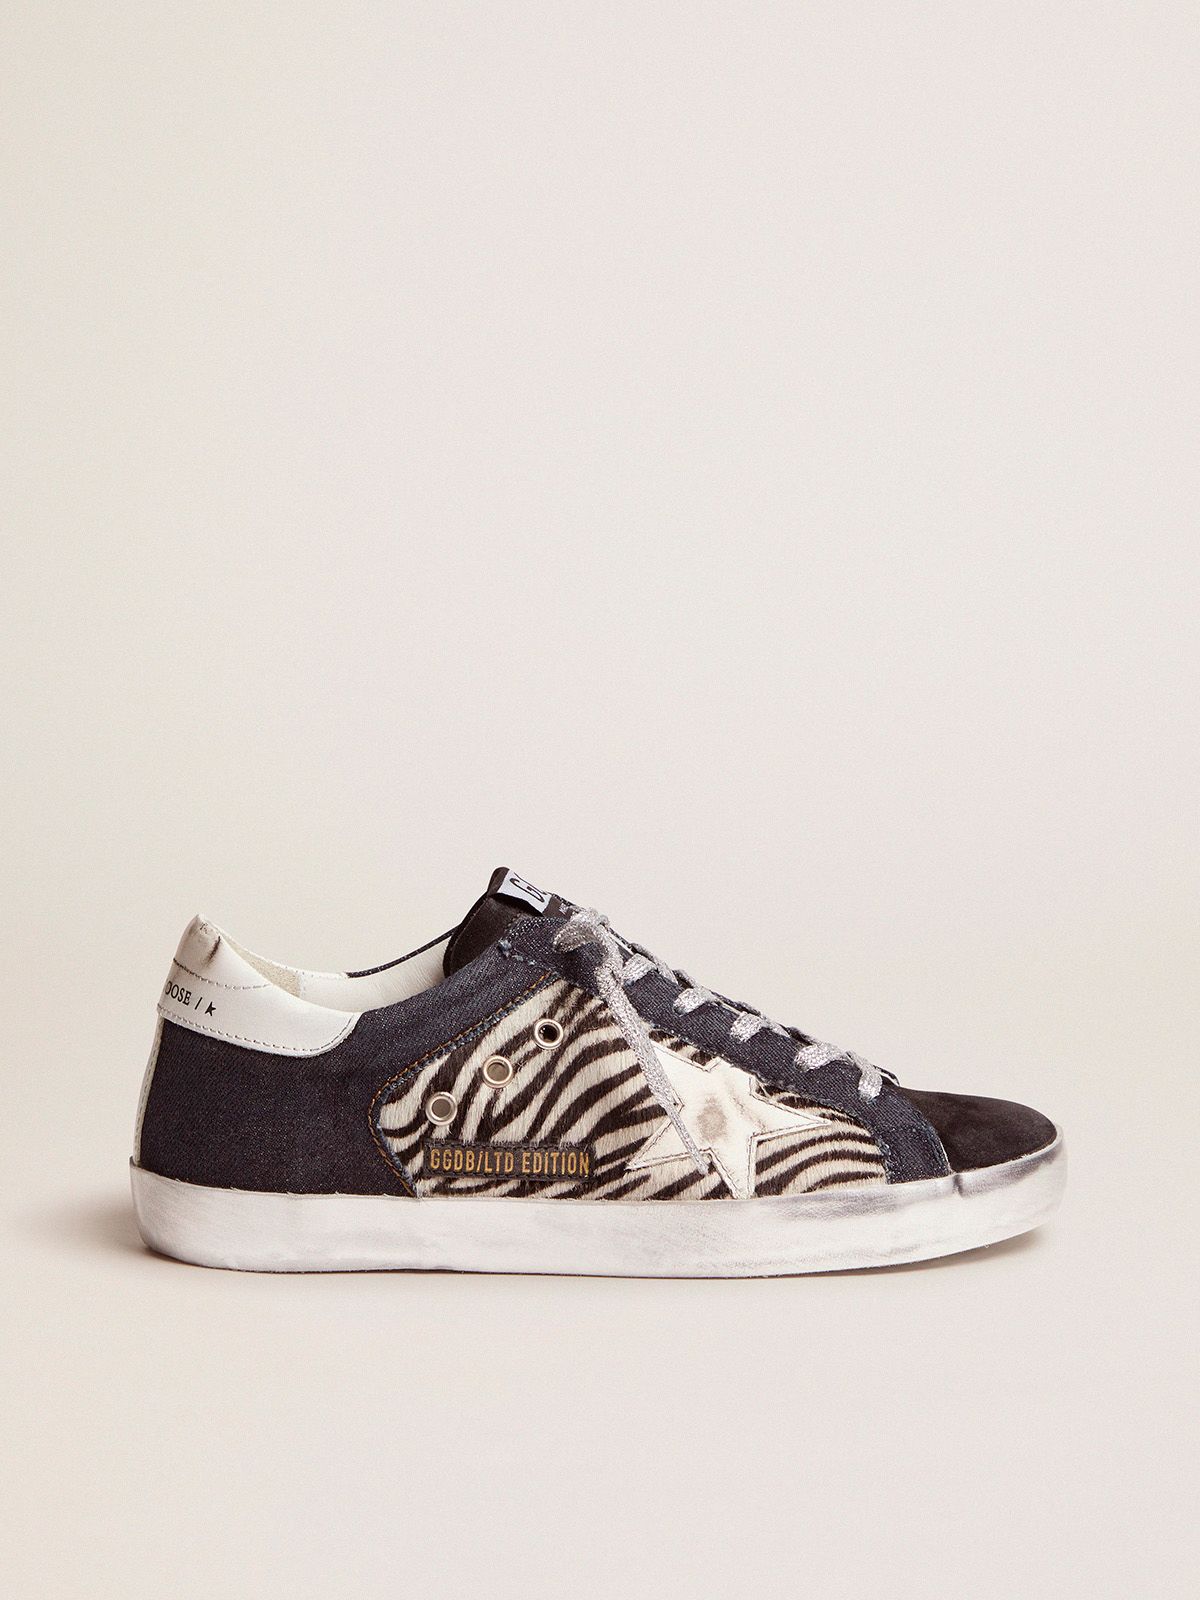 Sneakers Uomo Golden Goose LAB Limited Edition Super-Star sneakers in denim, zebra-print pony skin and suede